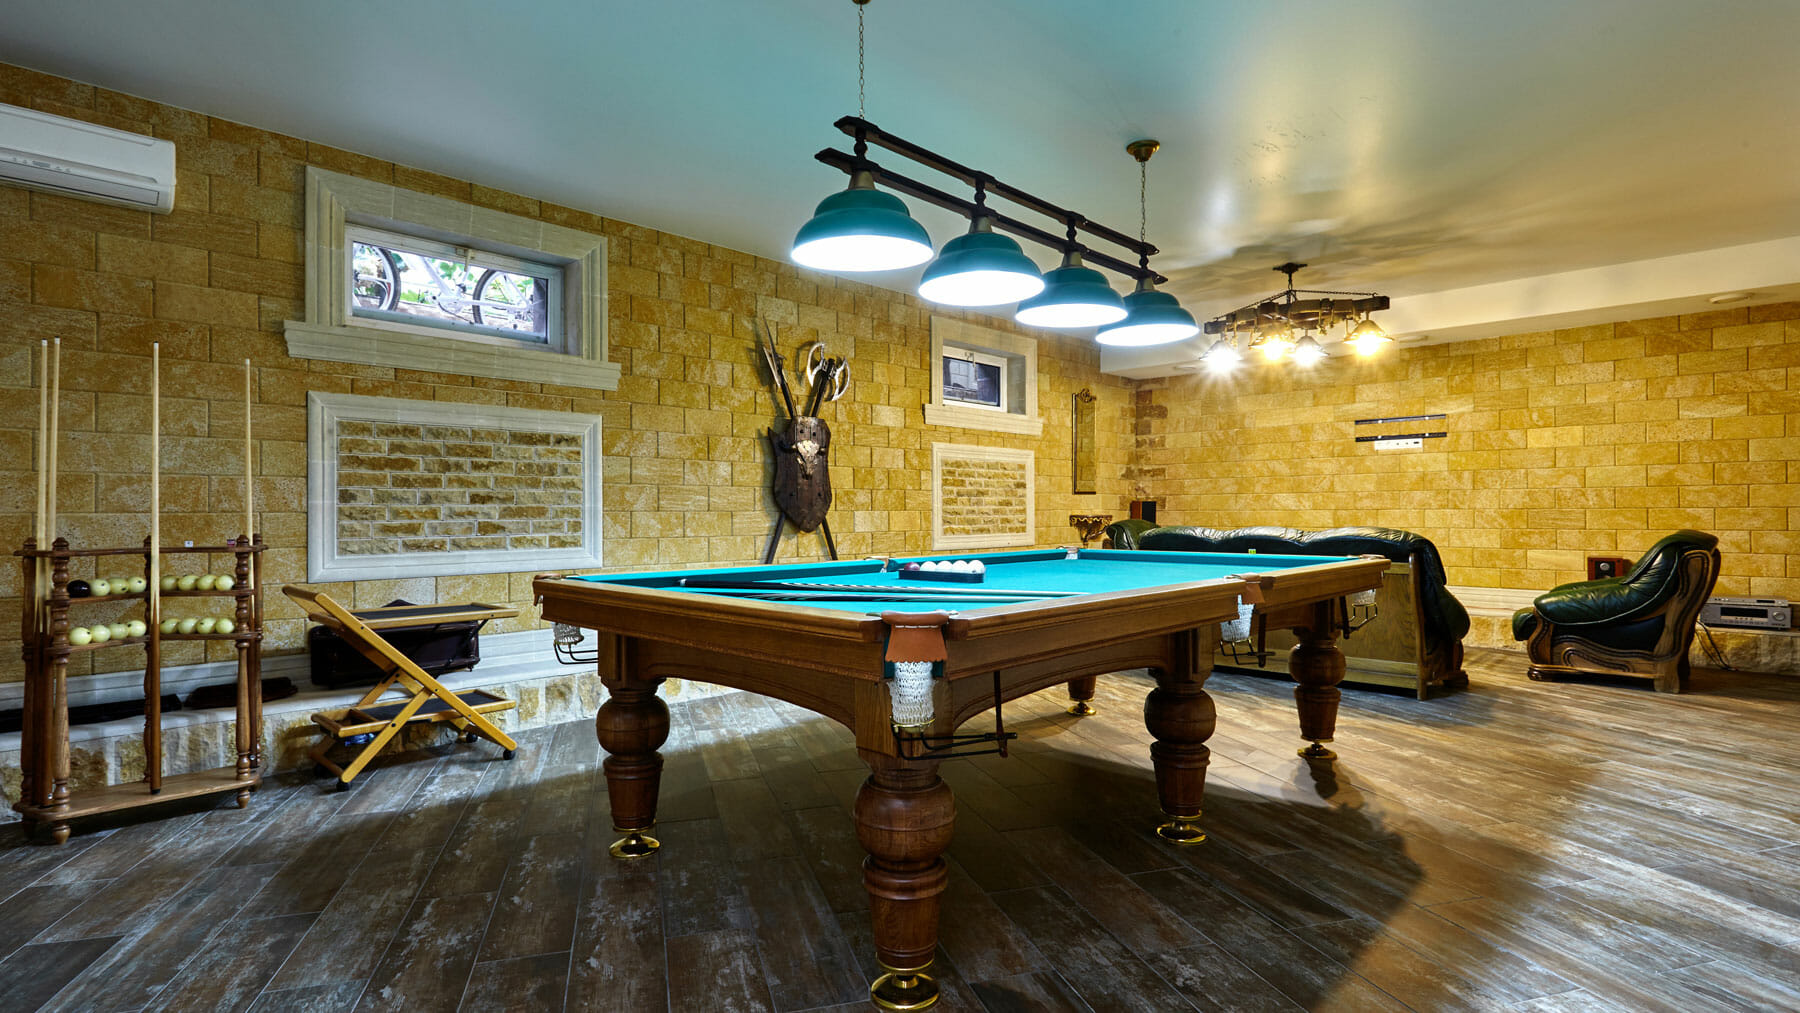 10 Fun and Unique Basement Remodeling Ideas to Include in Your Space